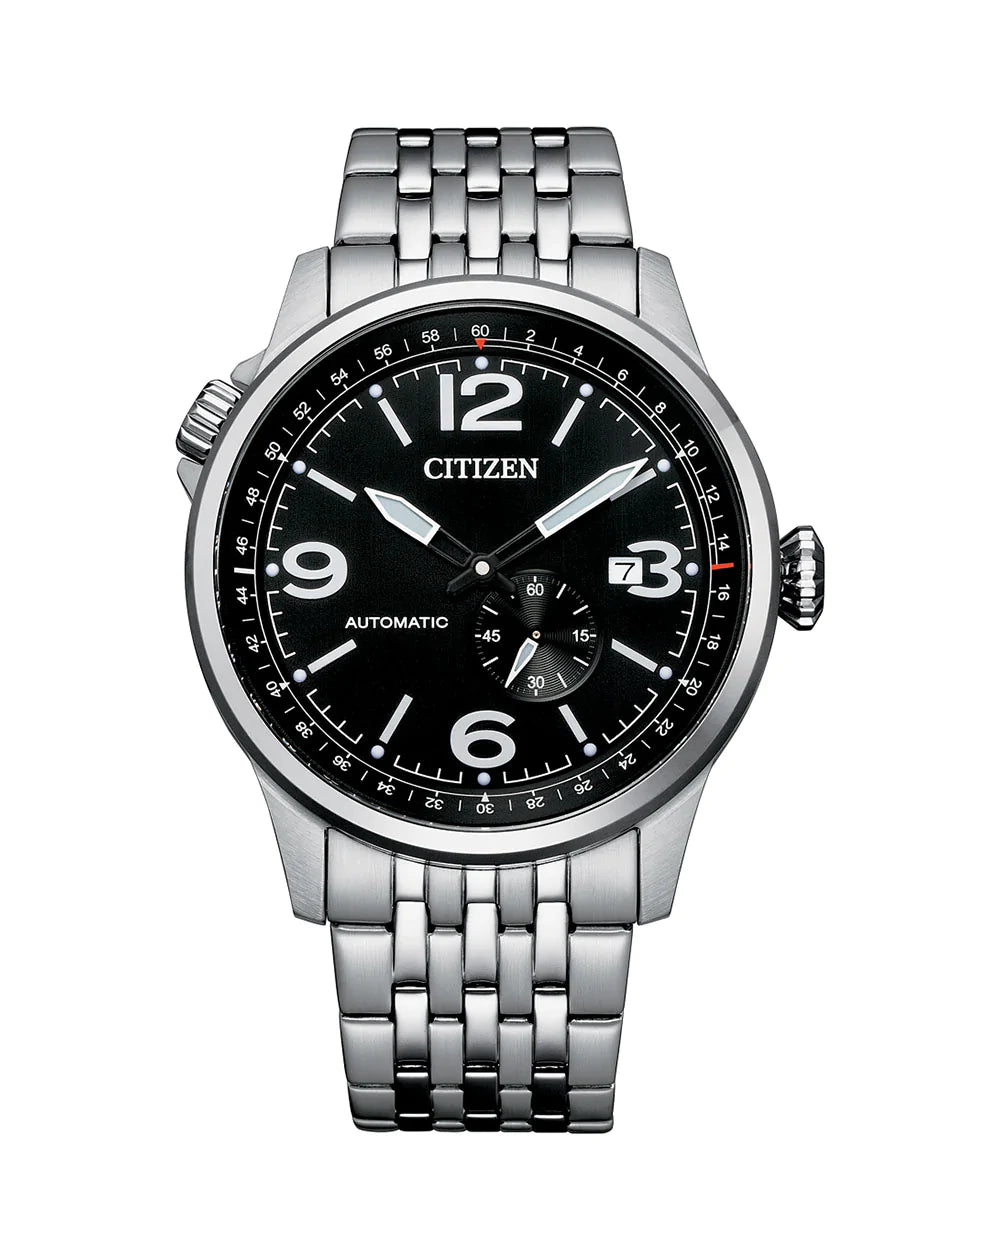 Gents Automatic Citizen Watch with Black Dial